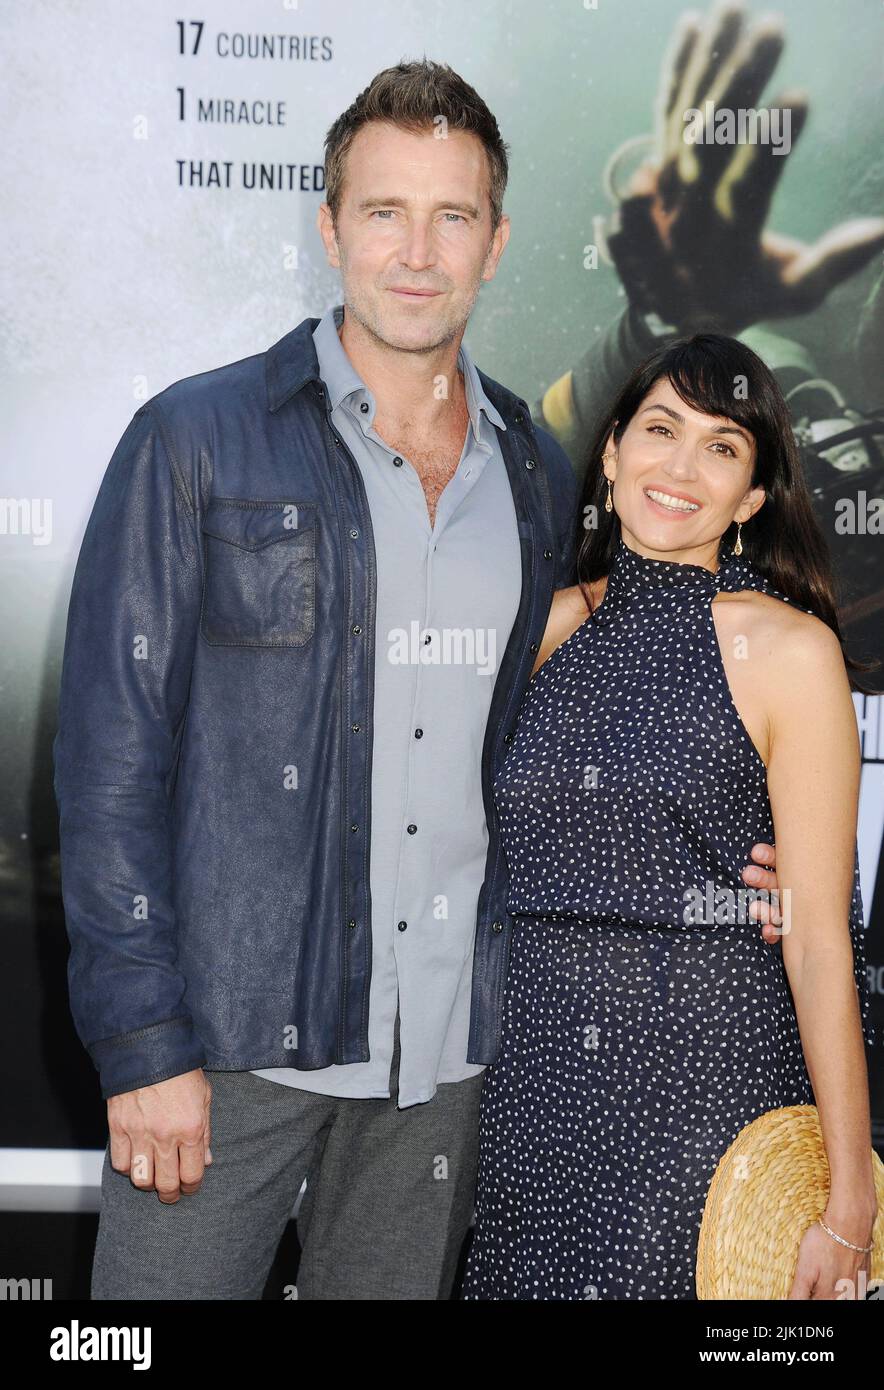 LOS ANGELES, CA - JULY 28: (L-R) Fernando Gil and Lela Loren attend the premiere of Prime Video's 'Thirteen Lives' at Westwood Village Theater on July Stock Photo